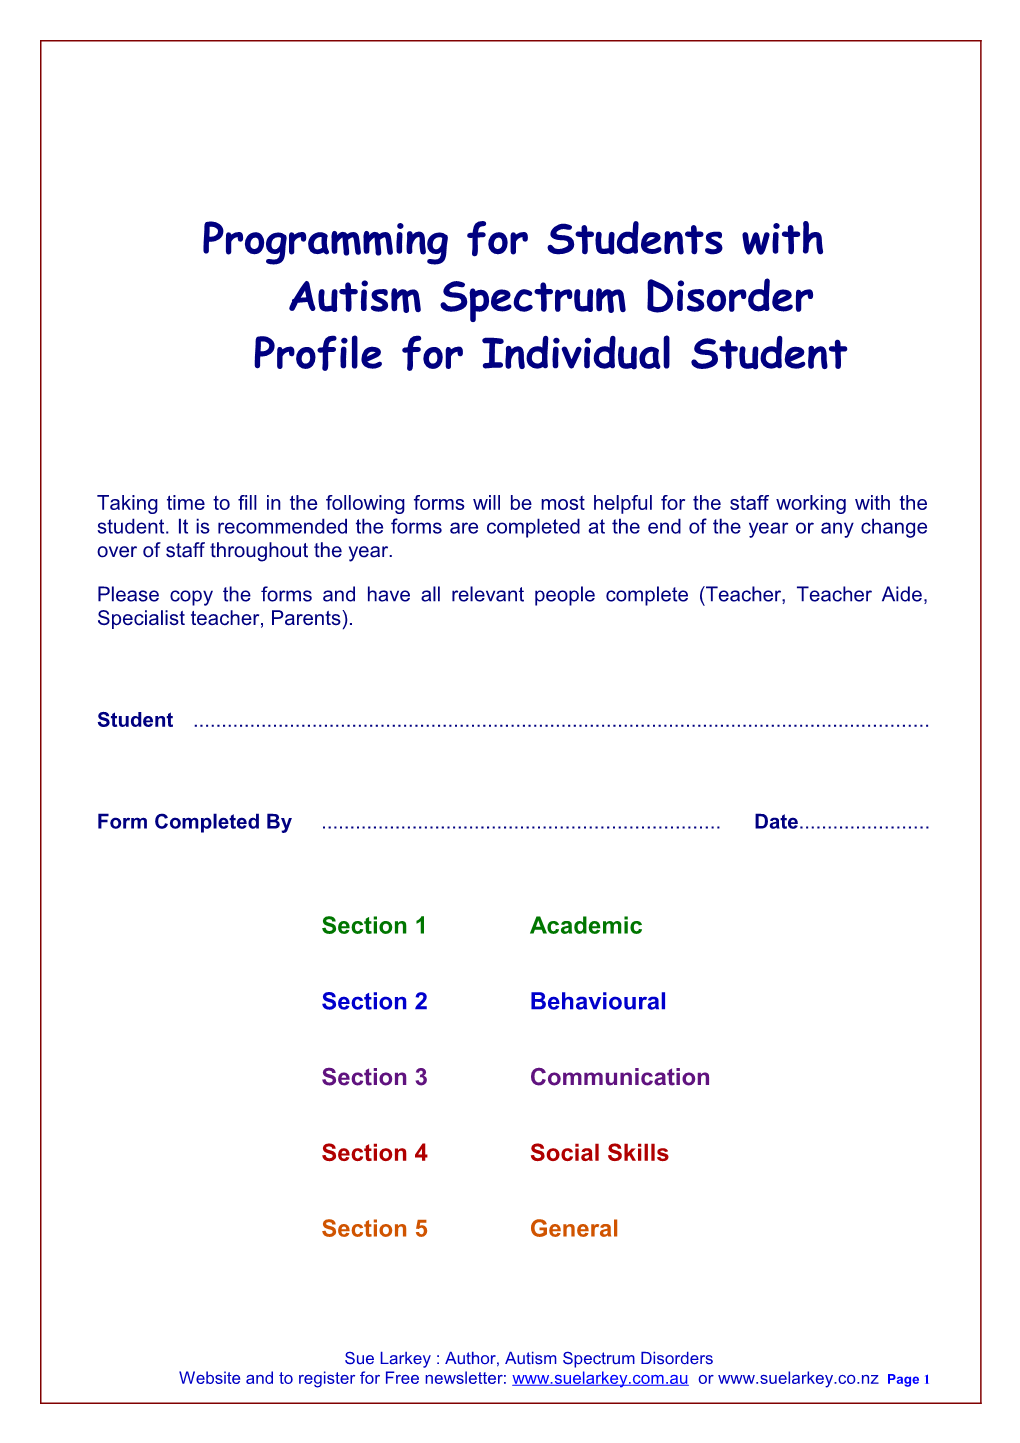 Programming for Students with Autism Spectrum Disorder